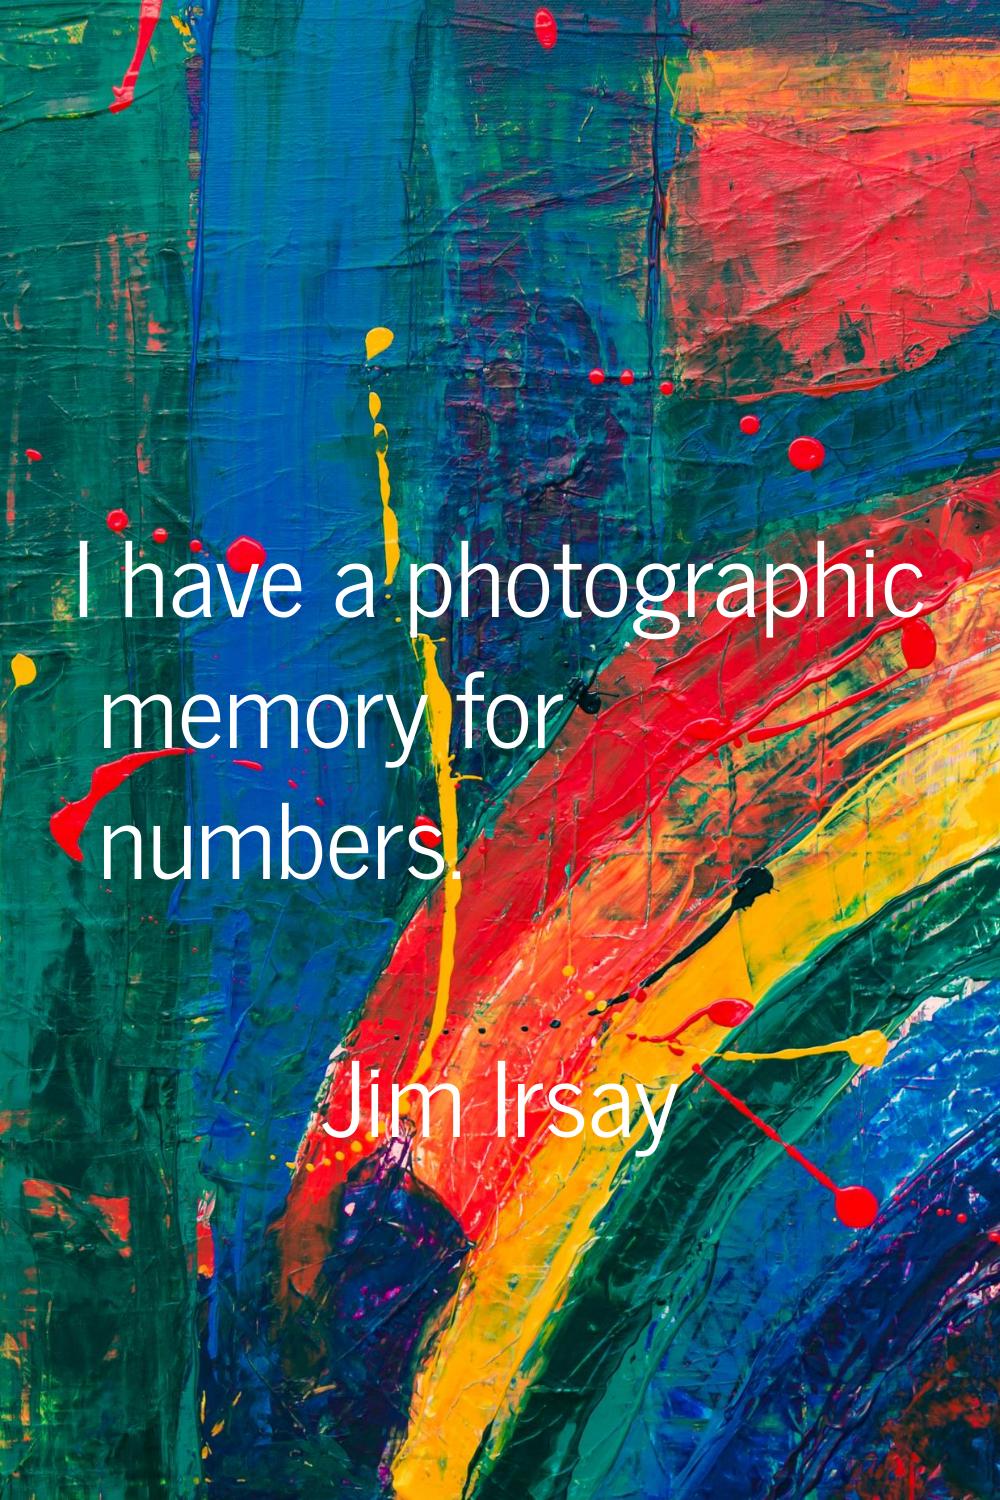 I have a photographic memory for numbers.